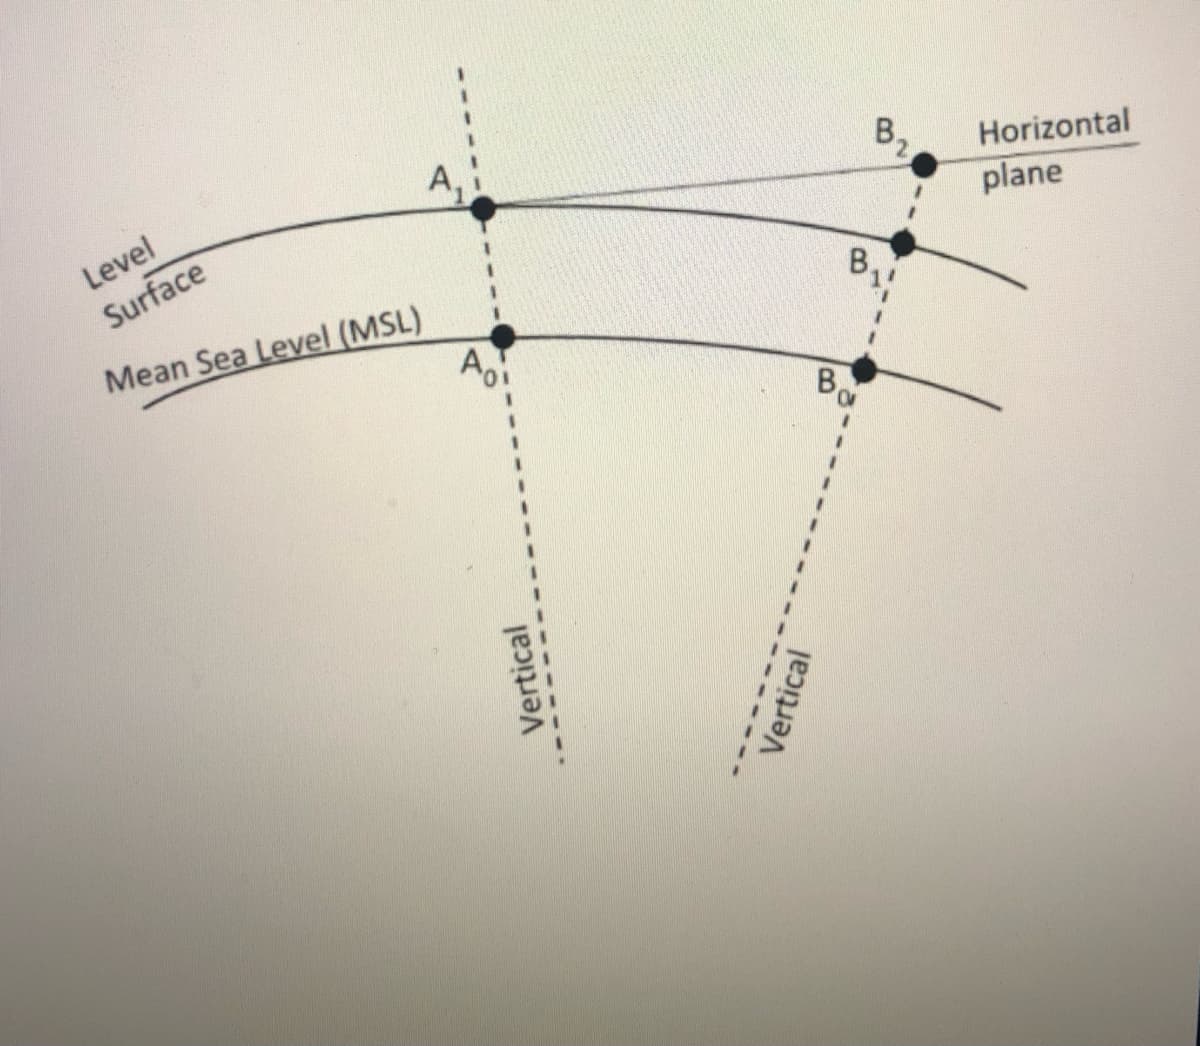 A,
82
Level
Horizontal
Surface
plane
Mean Sea Level (MSL)
Vertical
Vertical
